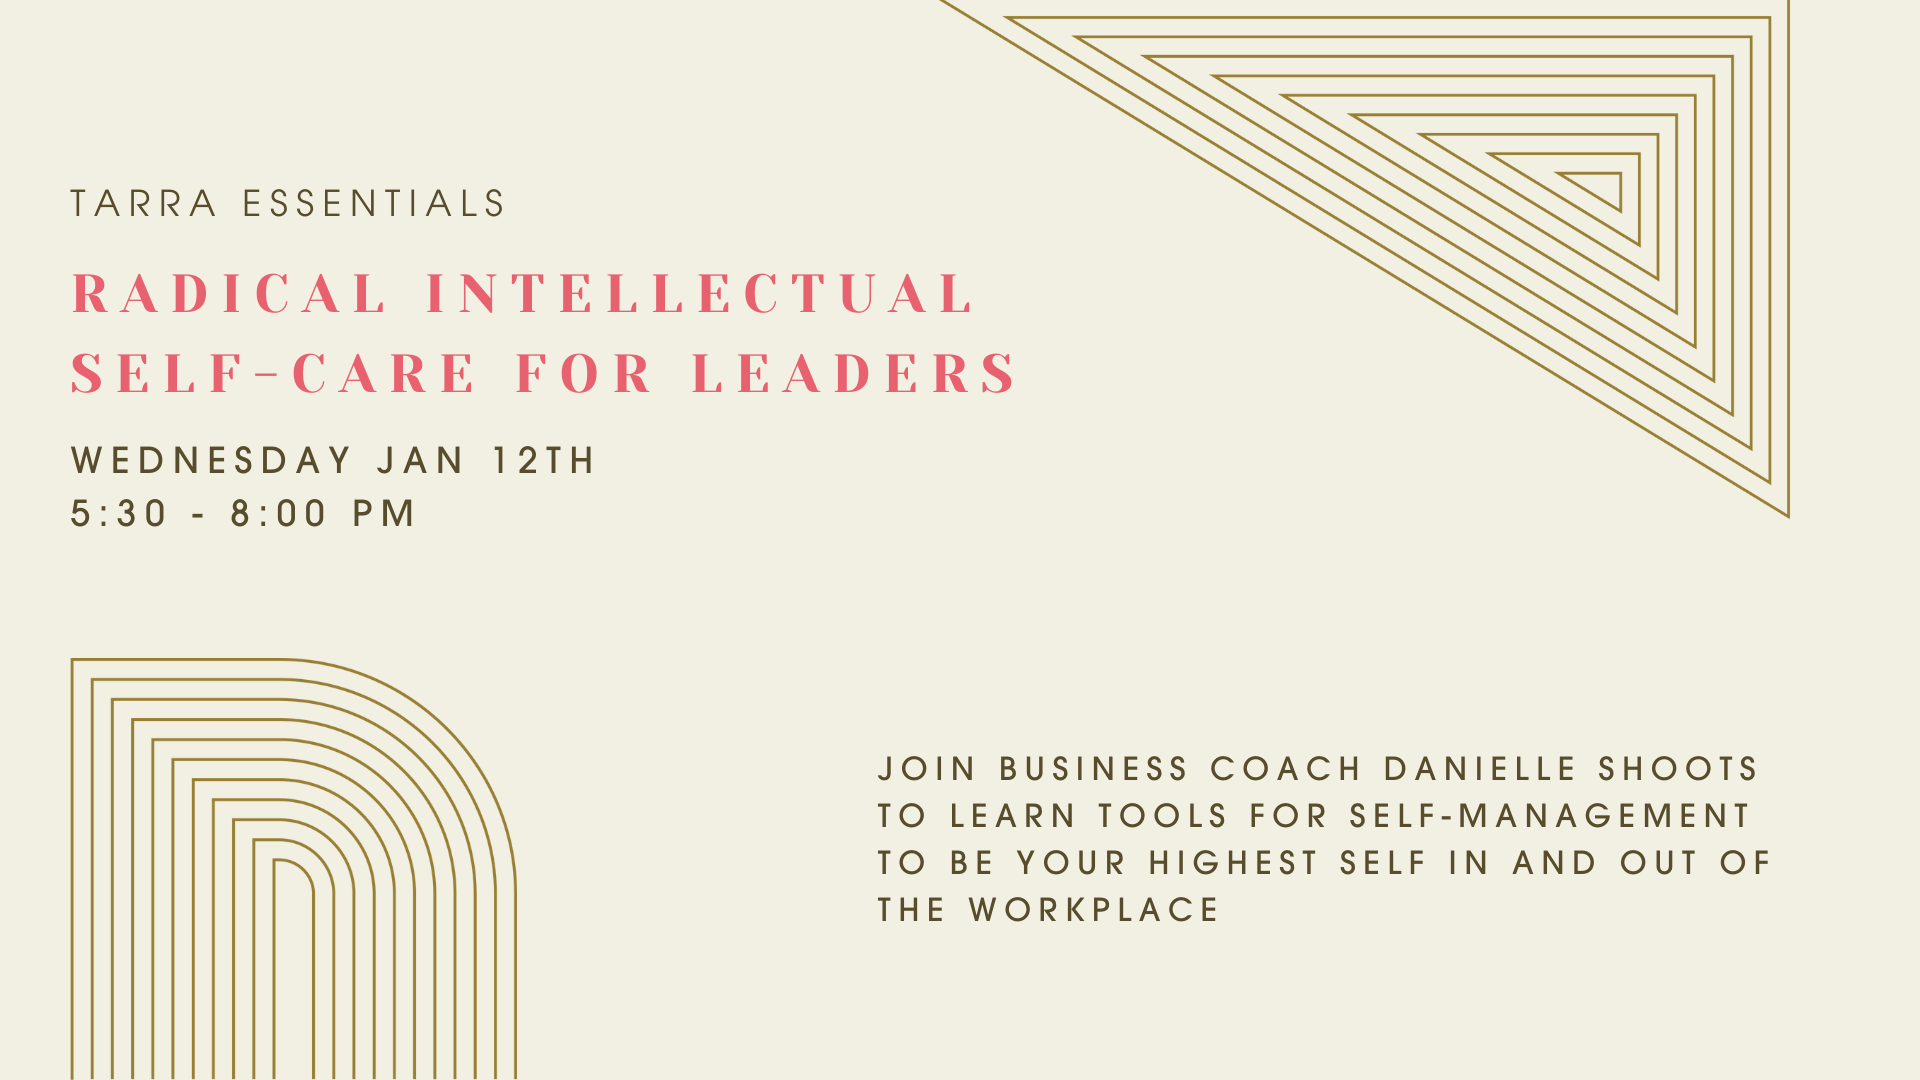 Event banner - TARRA Essentials: Radical Intellectual Self-Care for Leaders